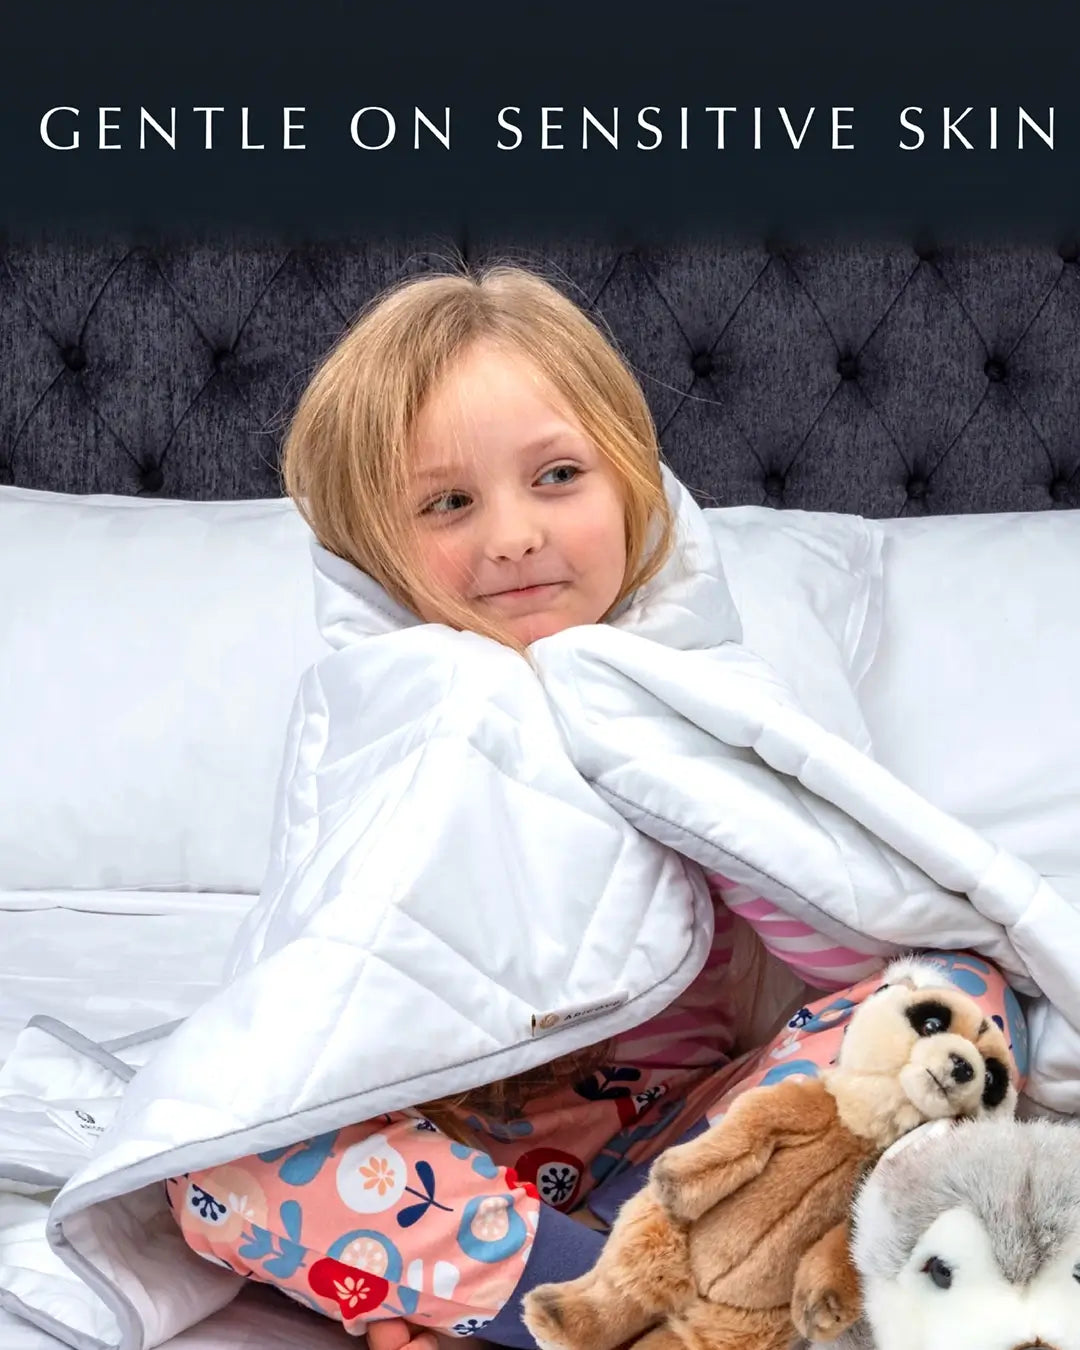 kids weighted blanket that is gentle on sensitive skin#weight_36-x48-5lb